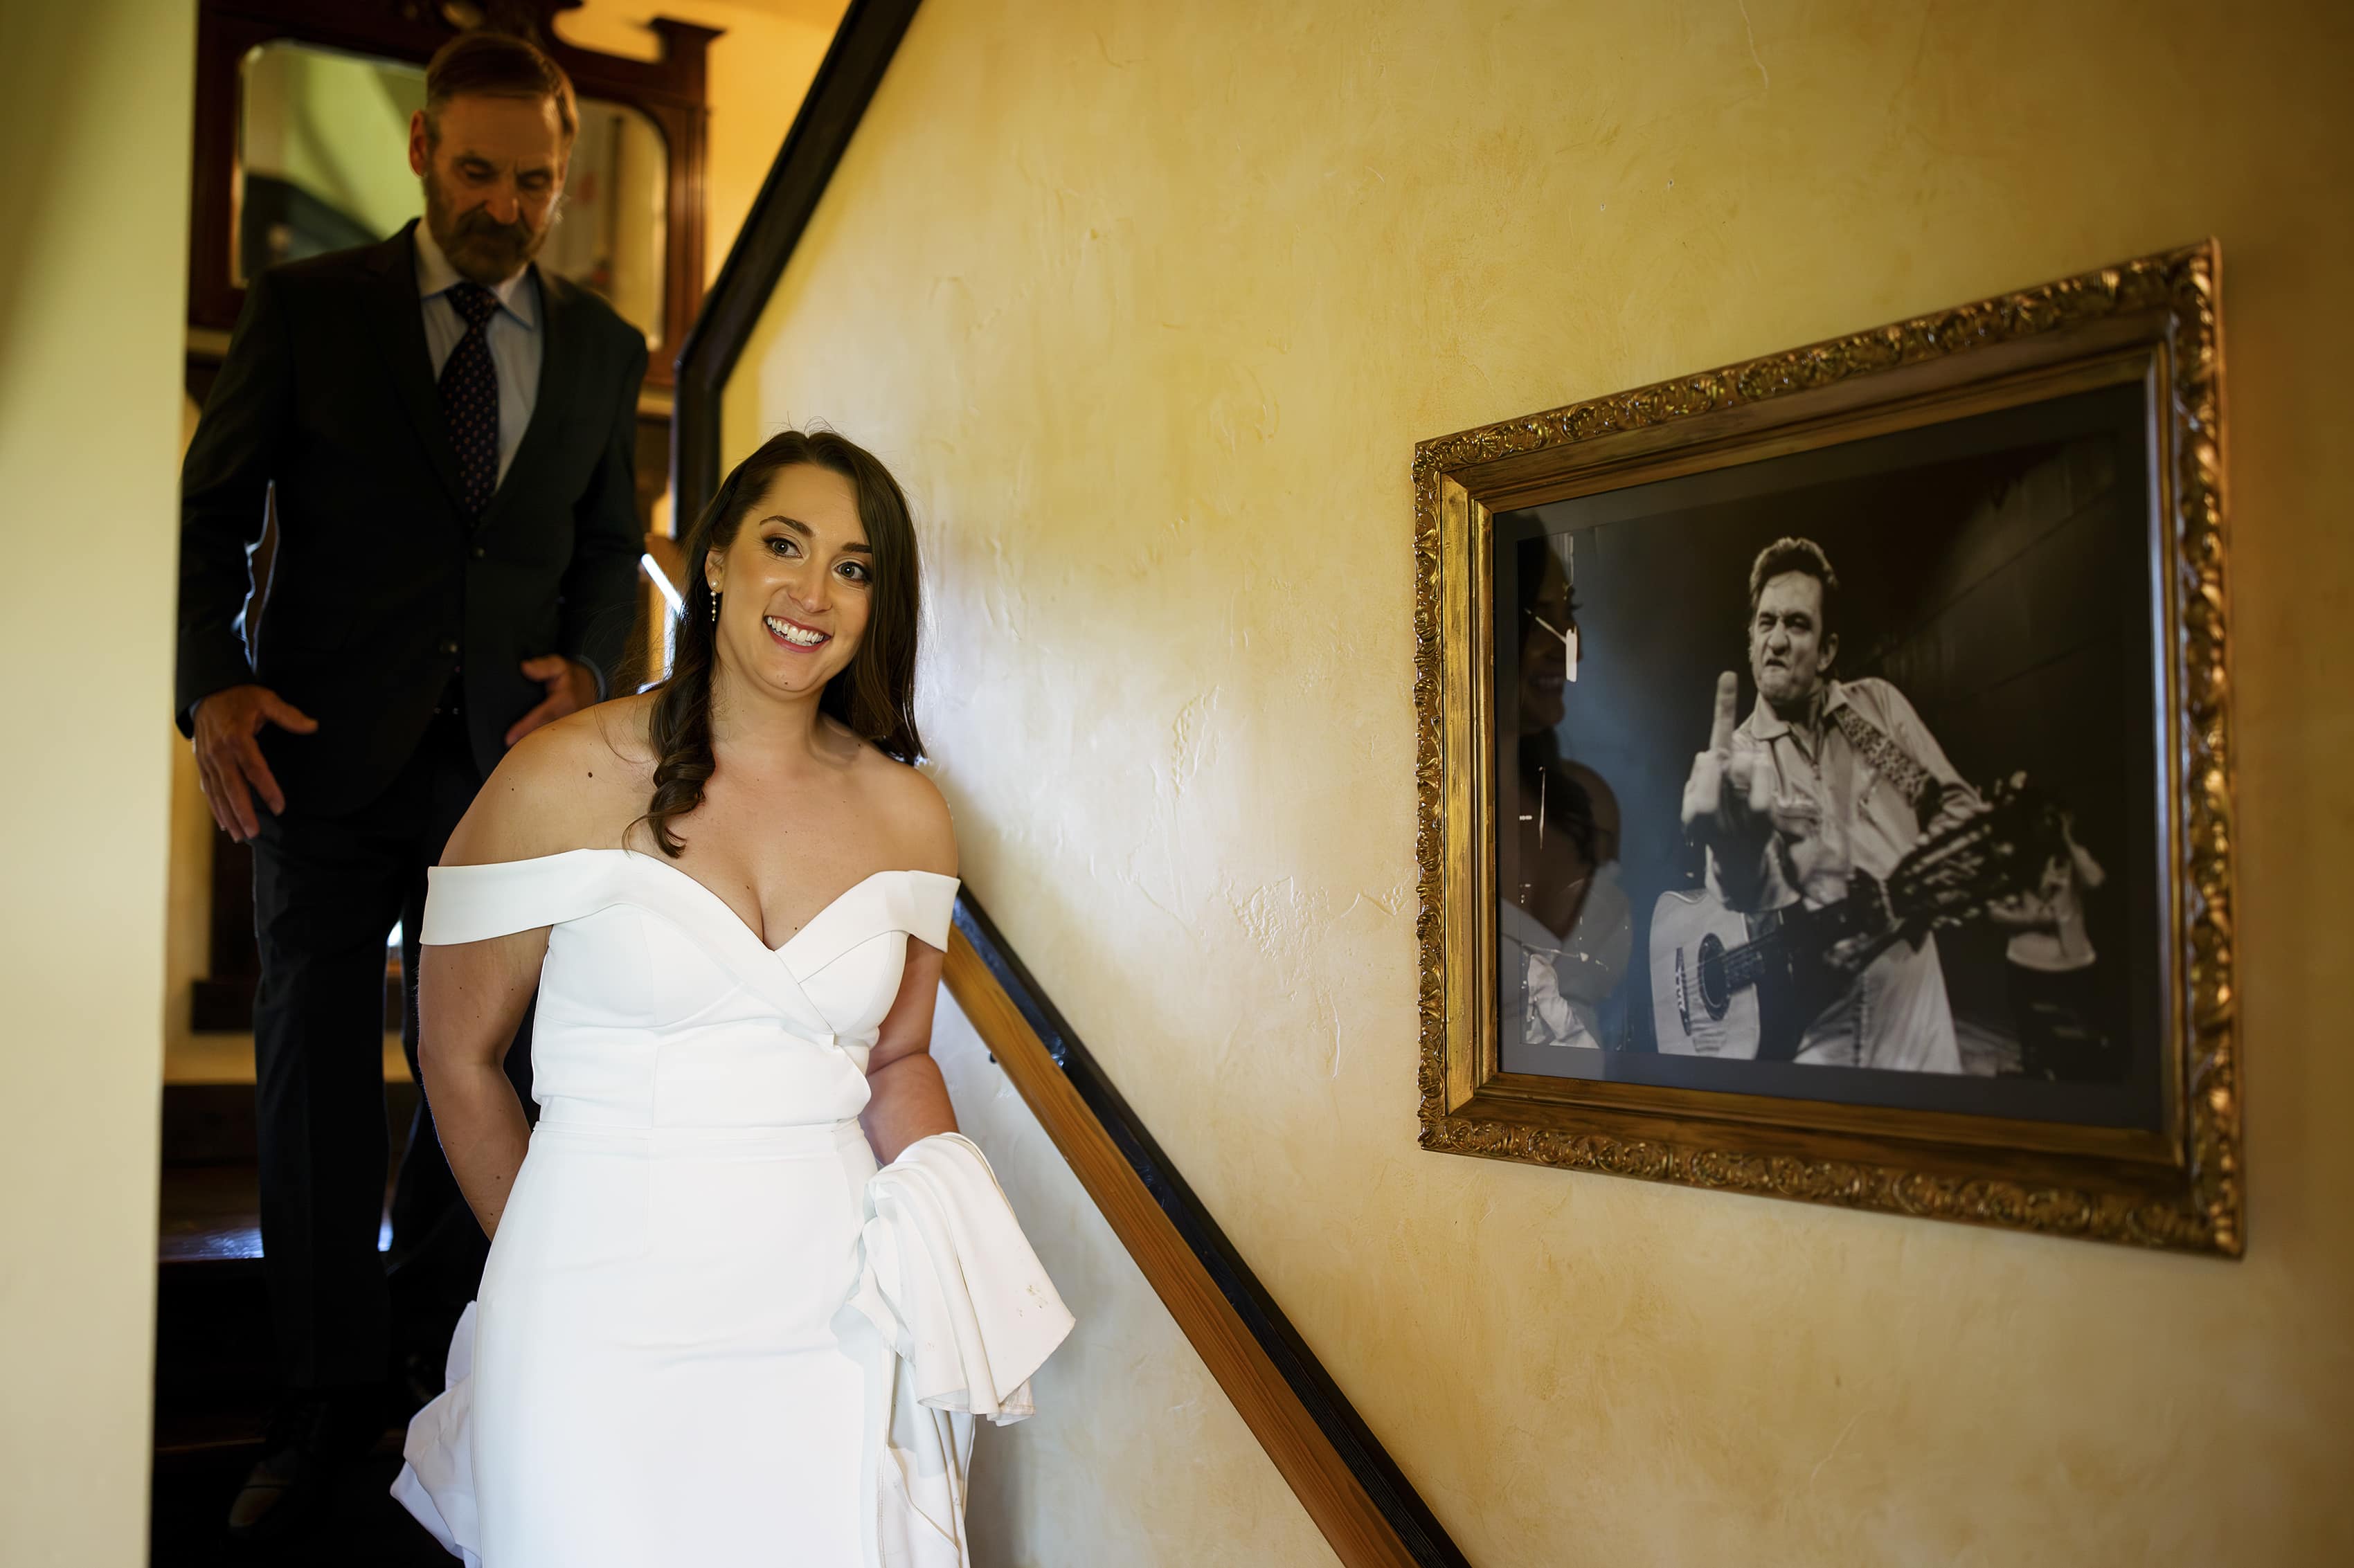 A bride walks down the stairs past a rock and roll portrait on the wall